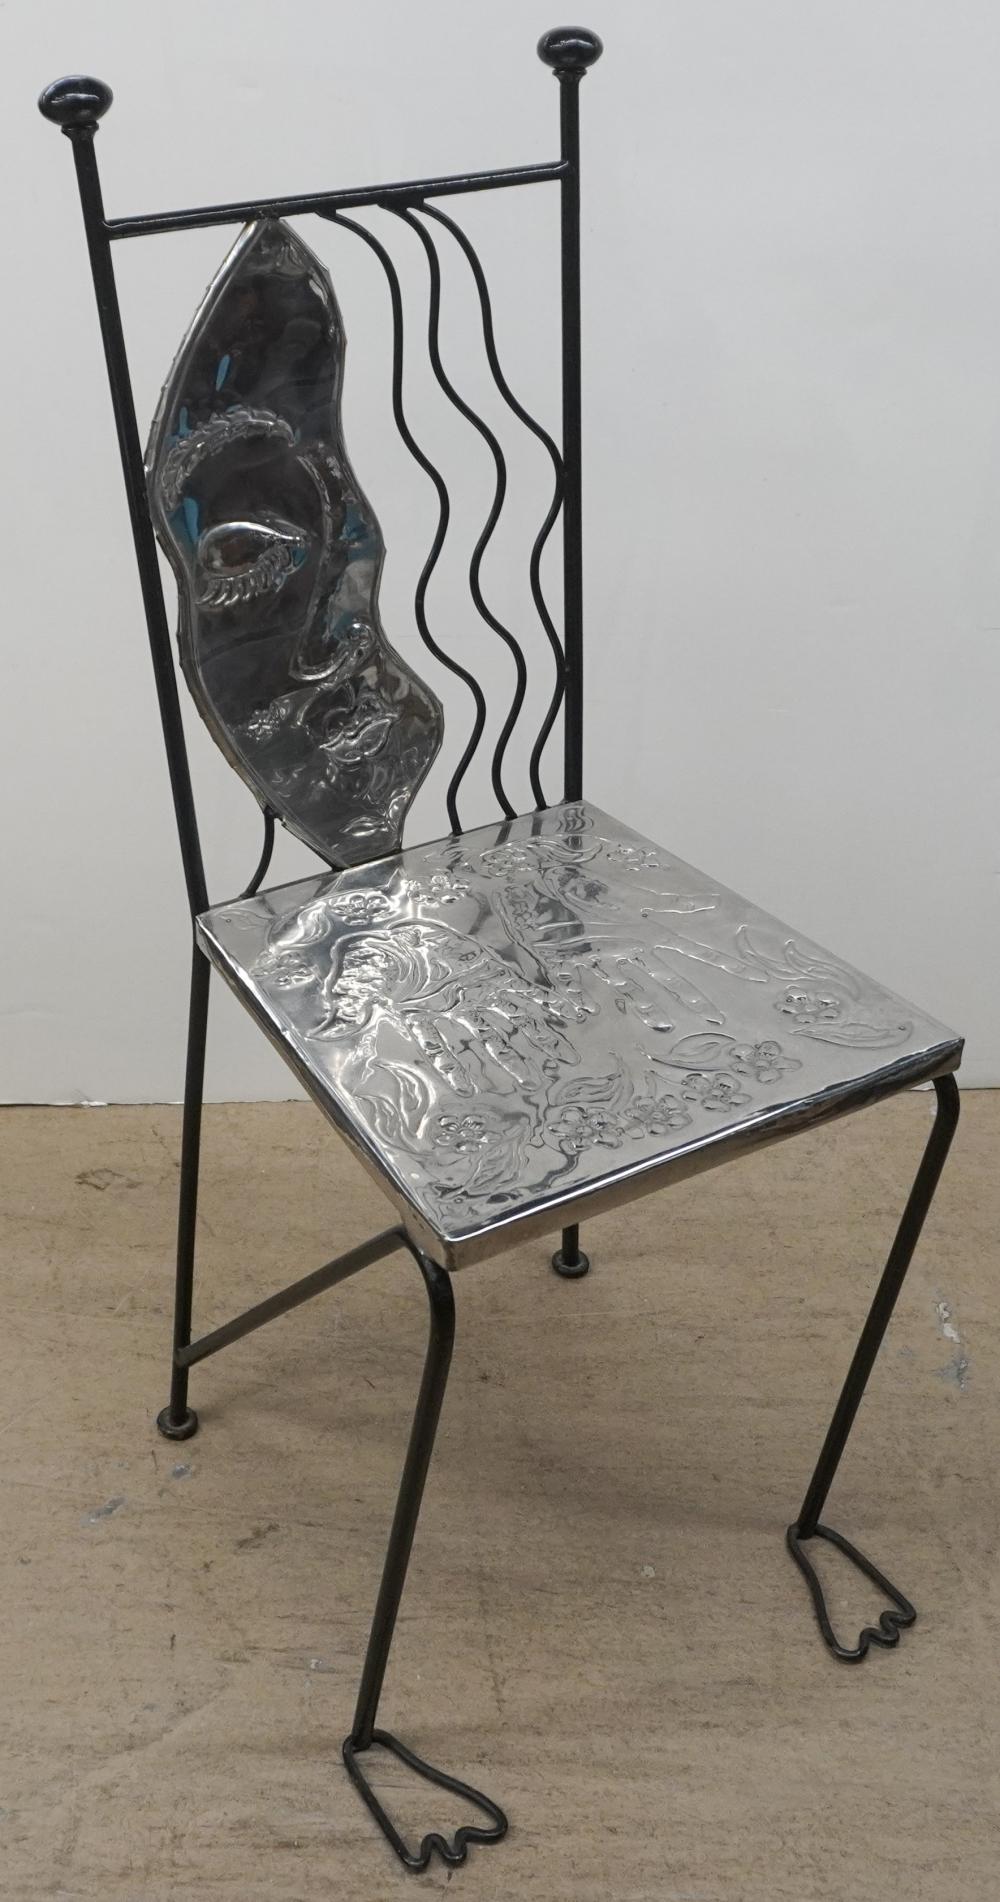 CHROME ABSTRACT FACE CHAIR H: 39